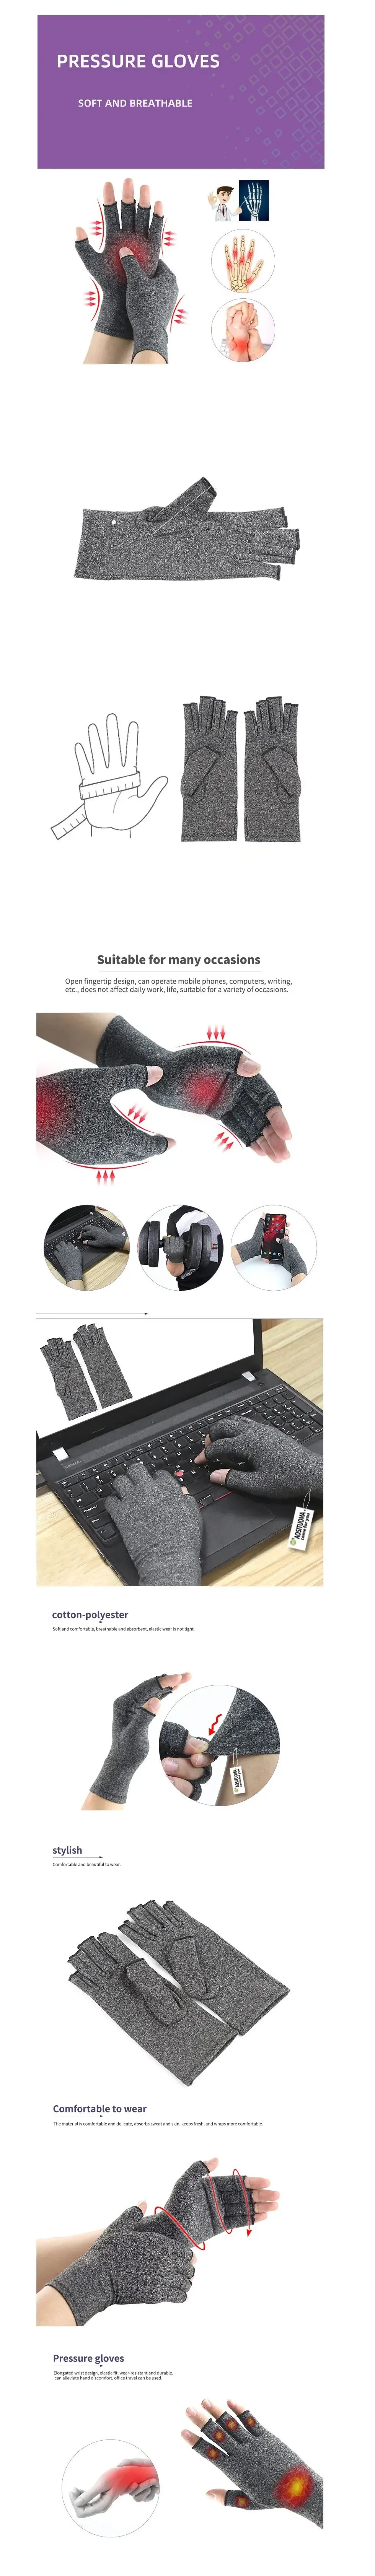 1Pair Arthritis Gloves,Touch Screen Gloves,Compression,Promote Circulation Gloves Anti Arthritis Therapy Wrist Support Wristband